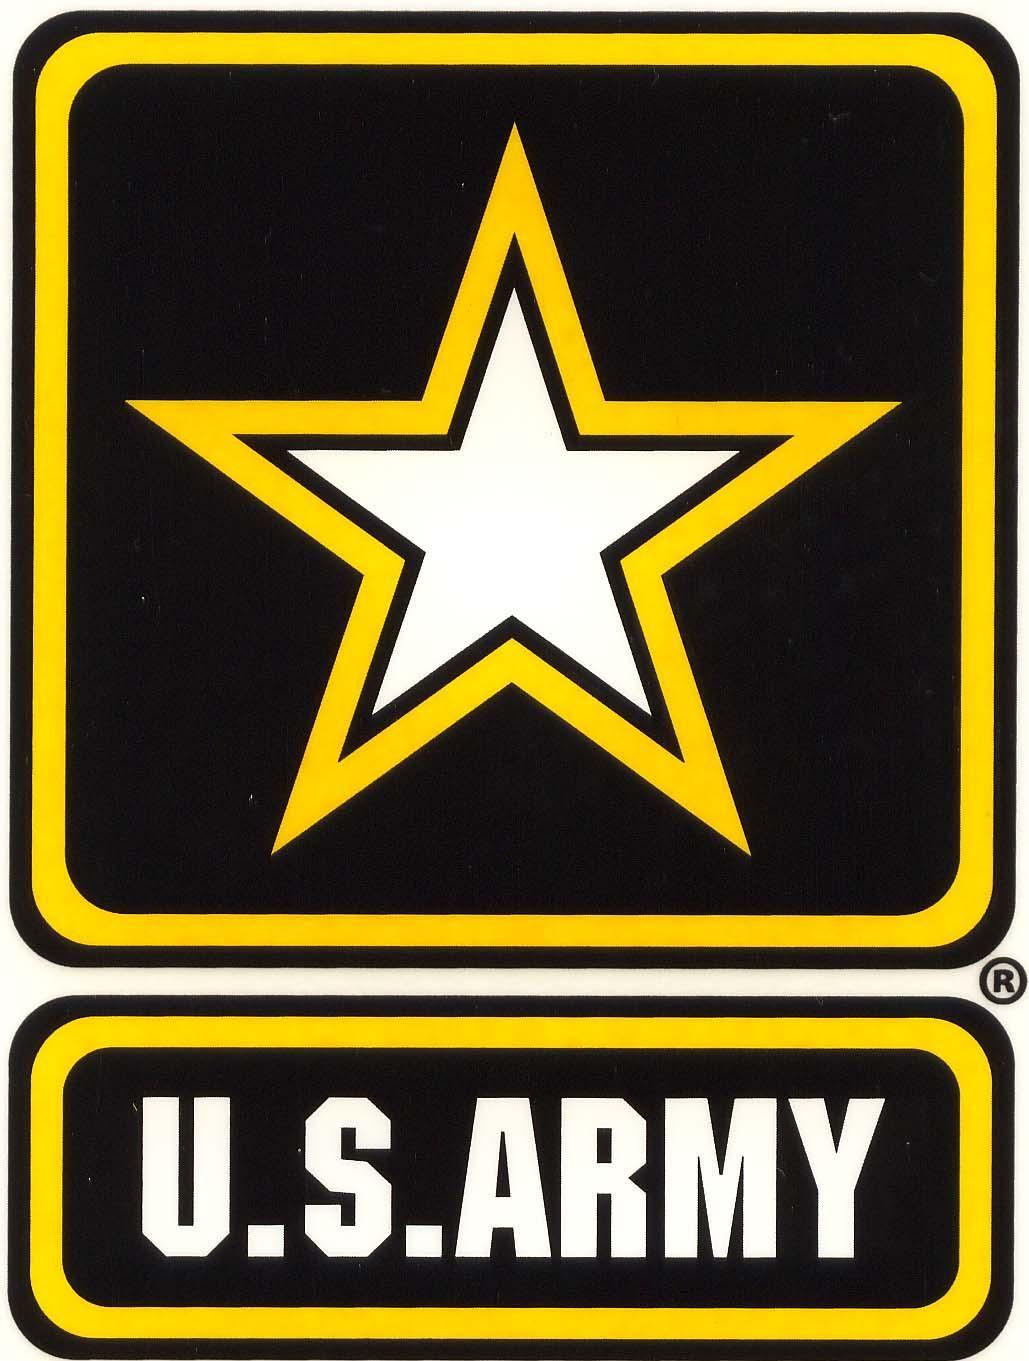 Military Logo - Image result for military logo. vet. Army, Military, Us army